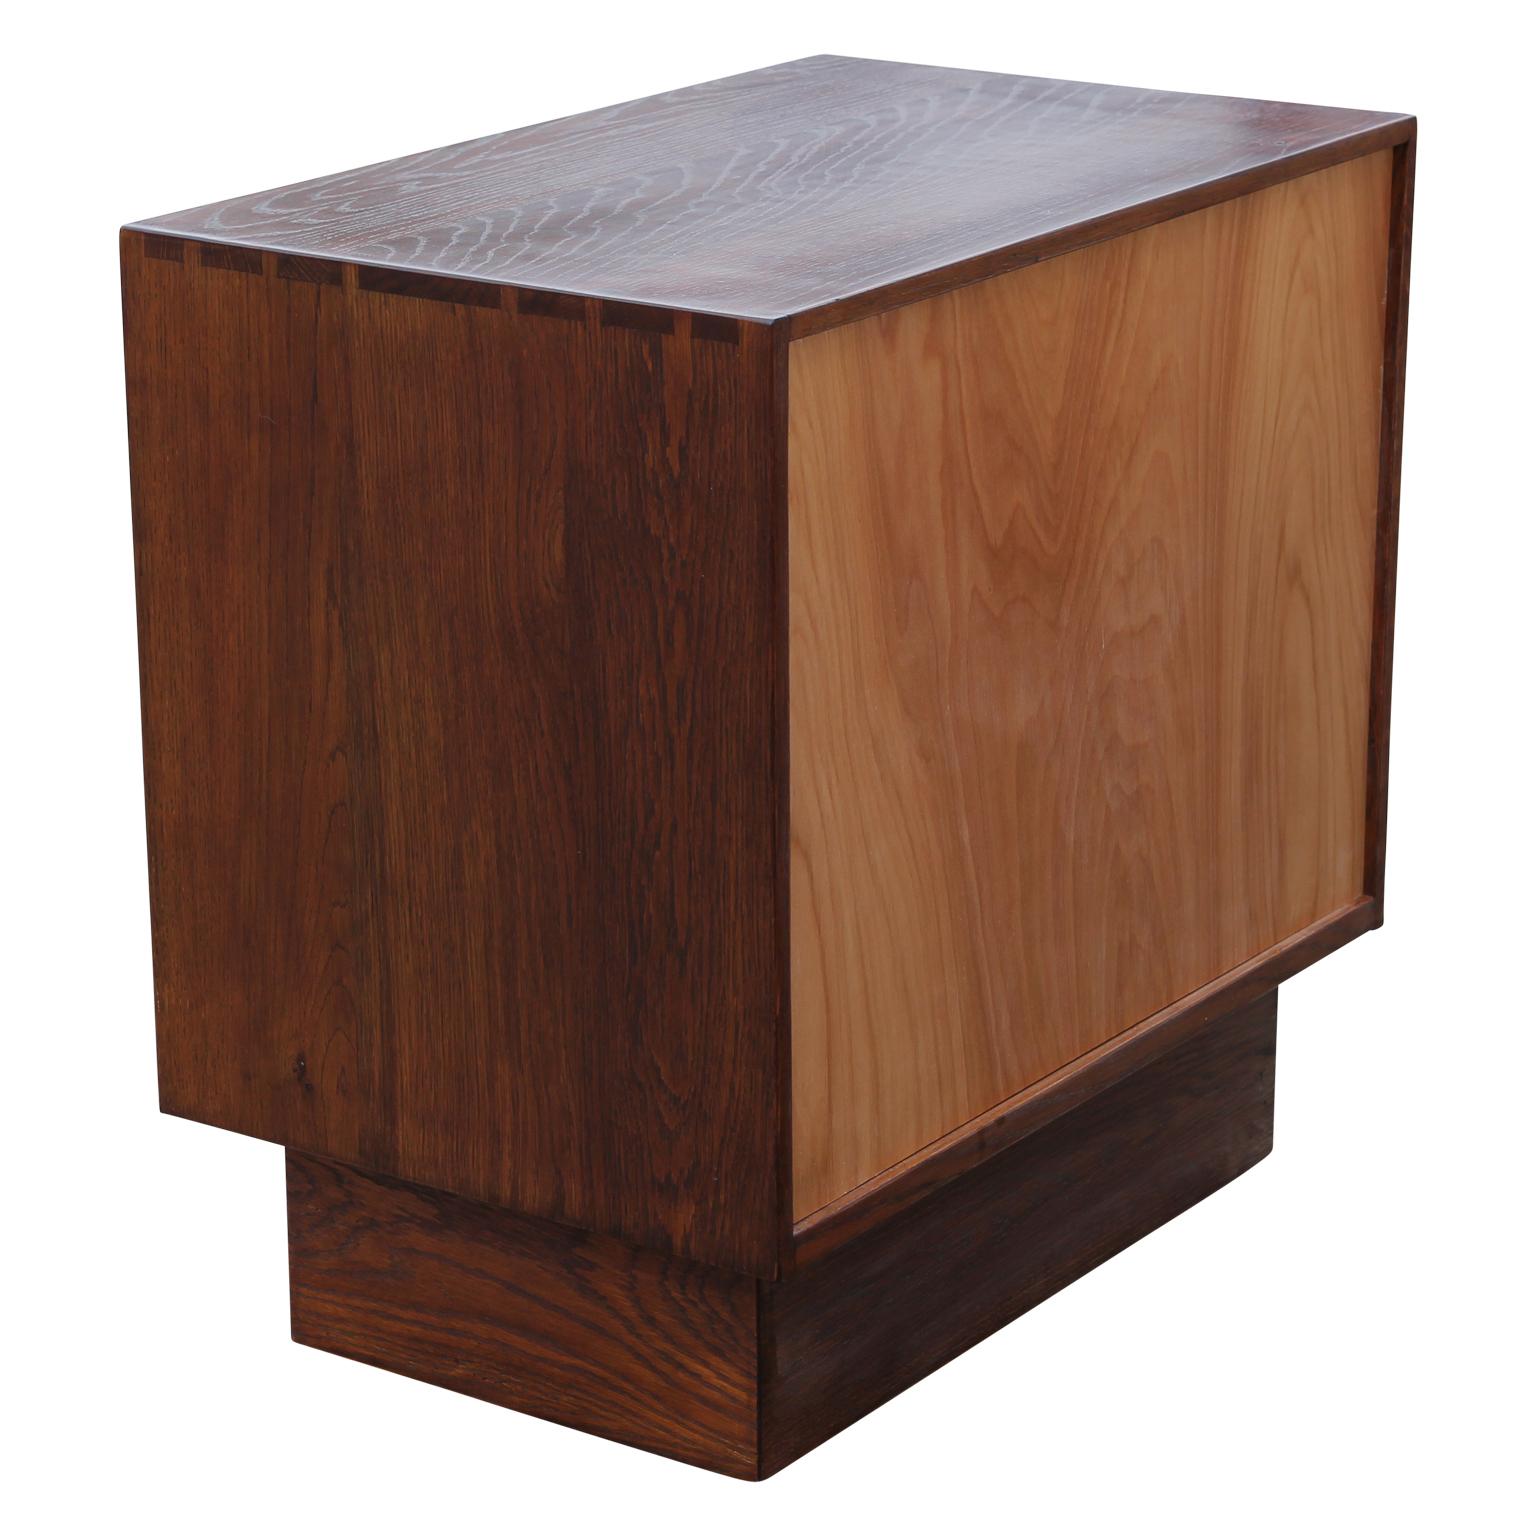 Hardwood Pair of Modern Studio Made Two-Toned Solid Wood End Tables / Nightstands